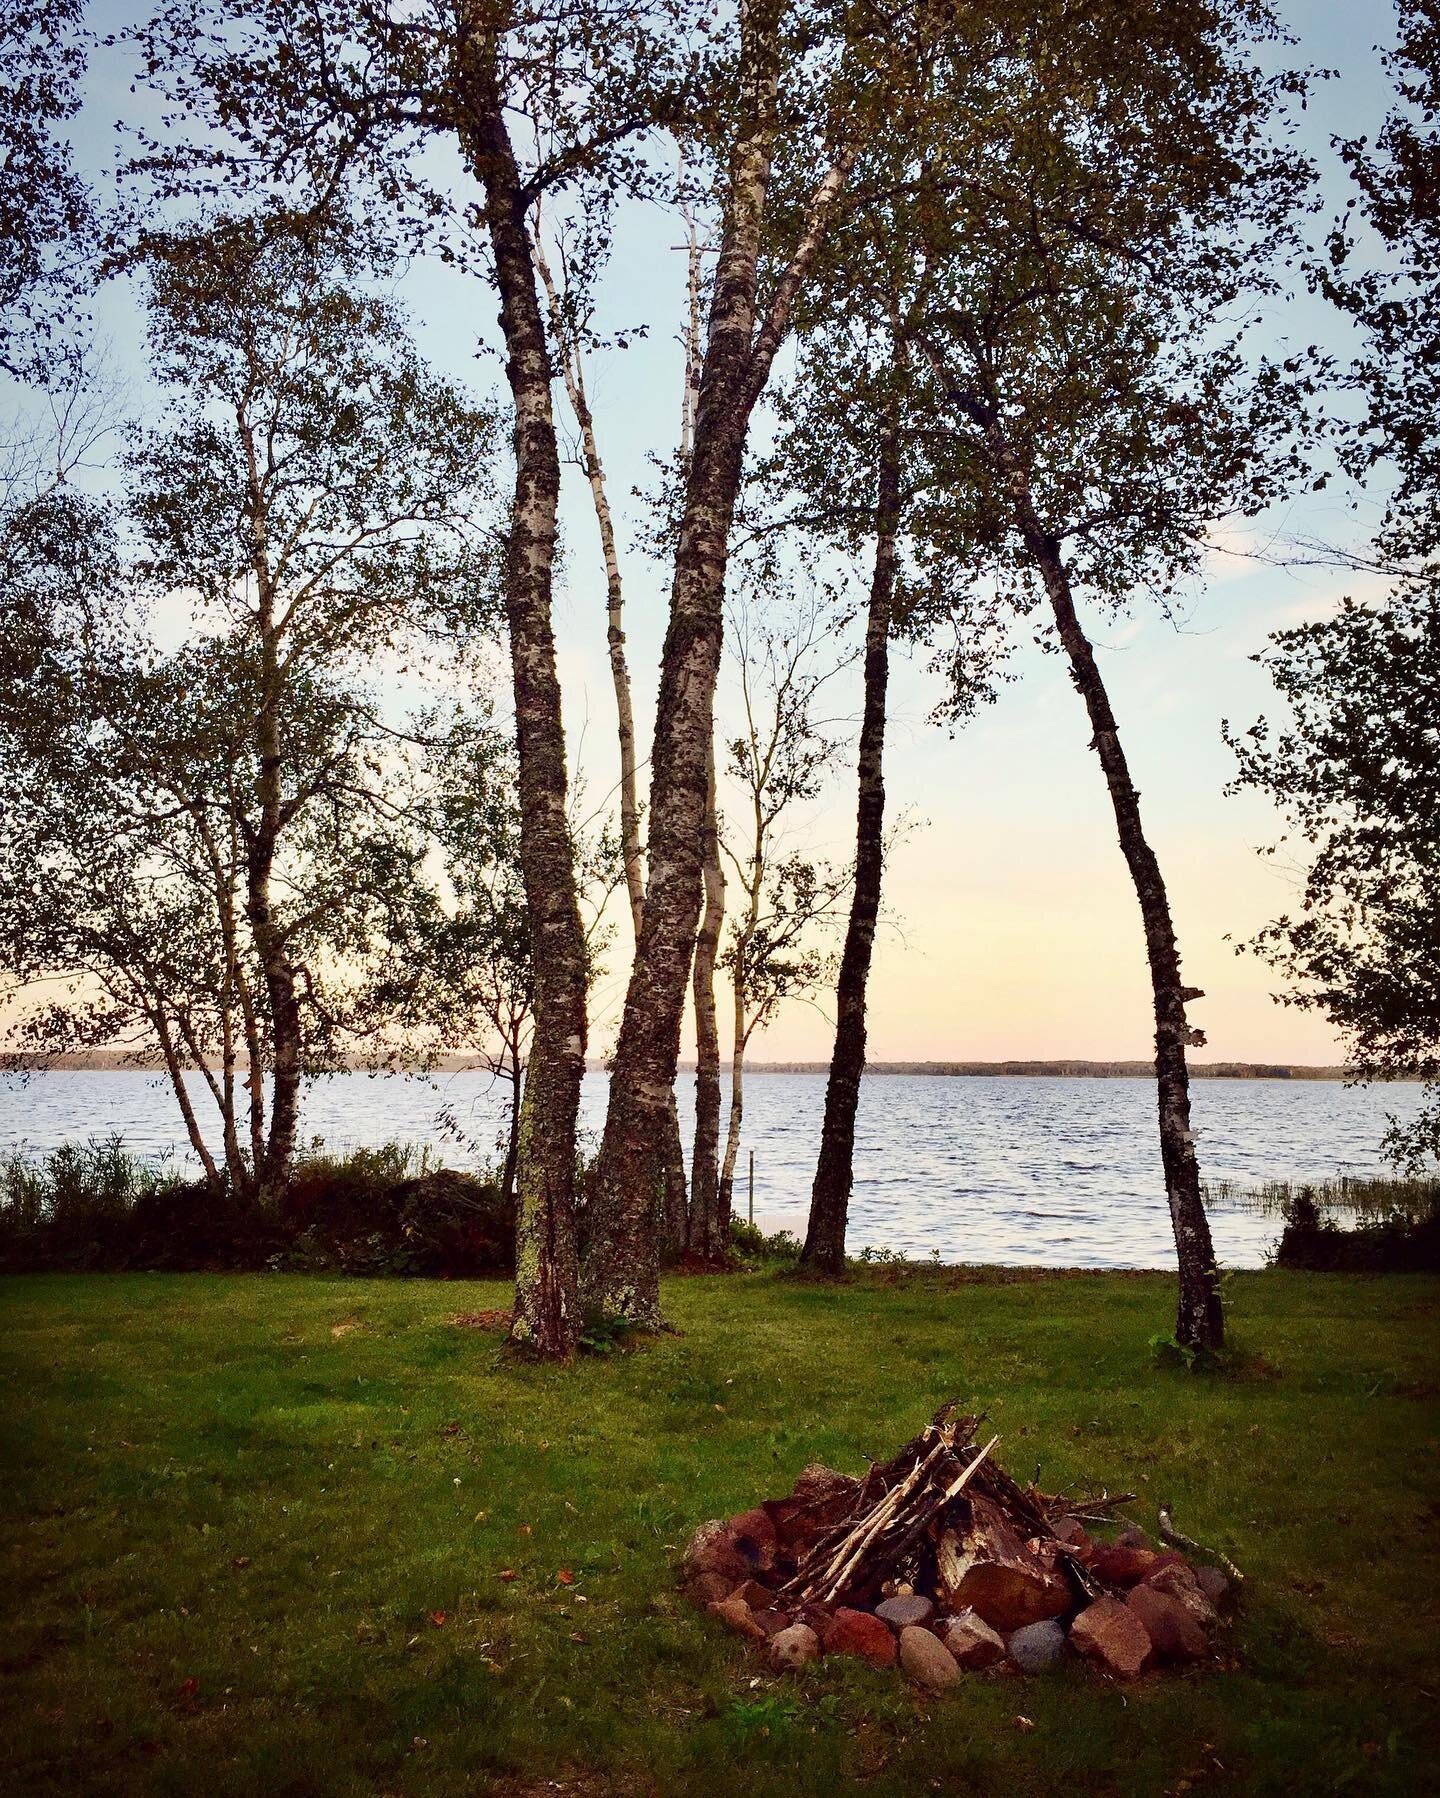 My sister is selling her lake lot in Duluth &mdash; just listed Friday. It's 2.5 hours from the Twin Cities and 30 minutes from Canal Park/downtown Duluth. Almost 1 acre along Wild Rice Lake shoreline, with electric hook-up. Dock included. DM for mor